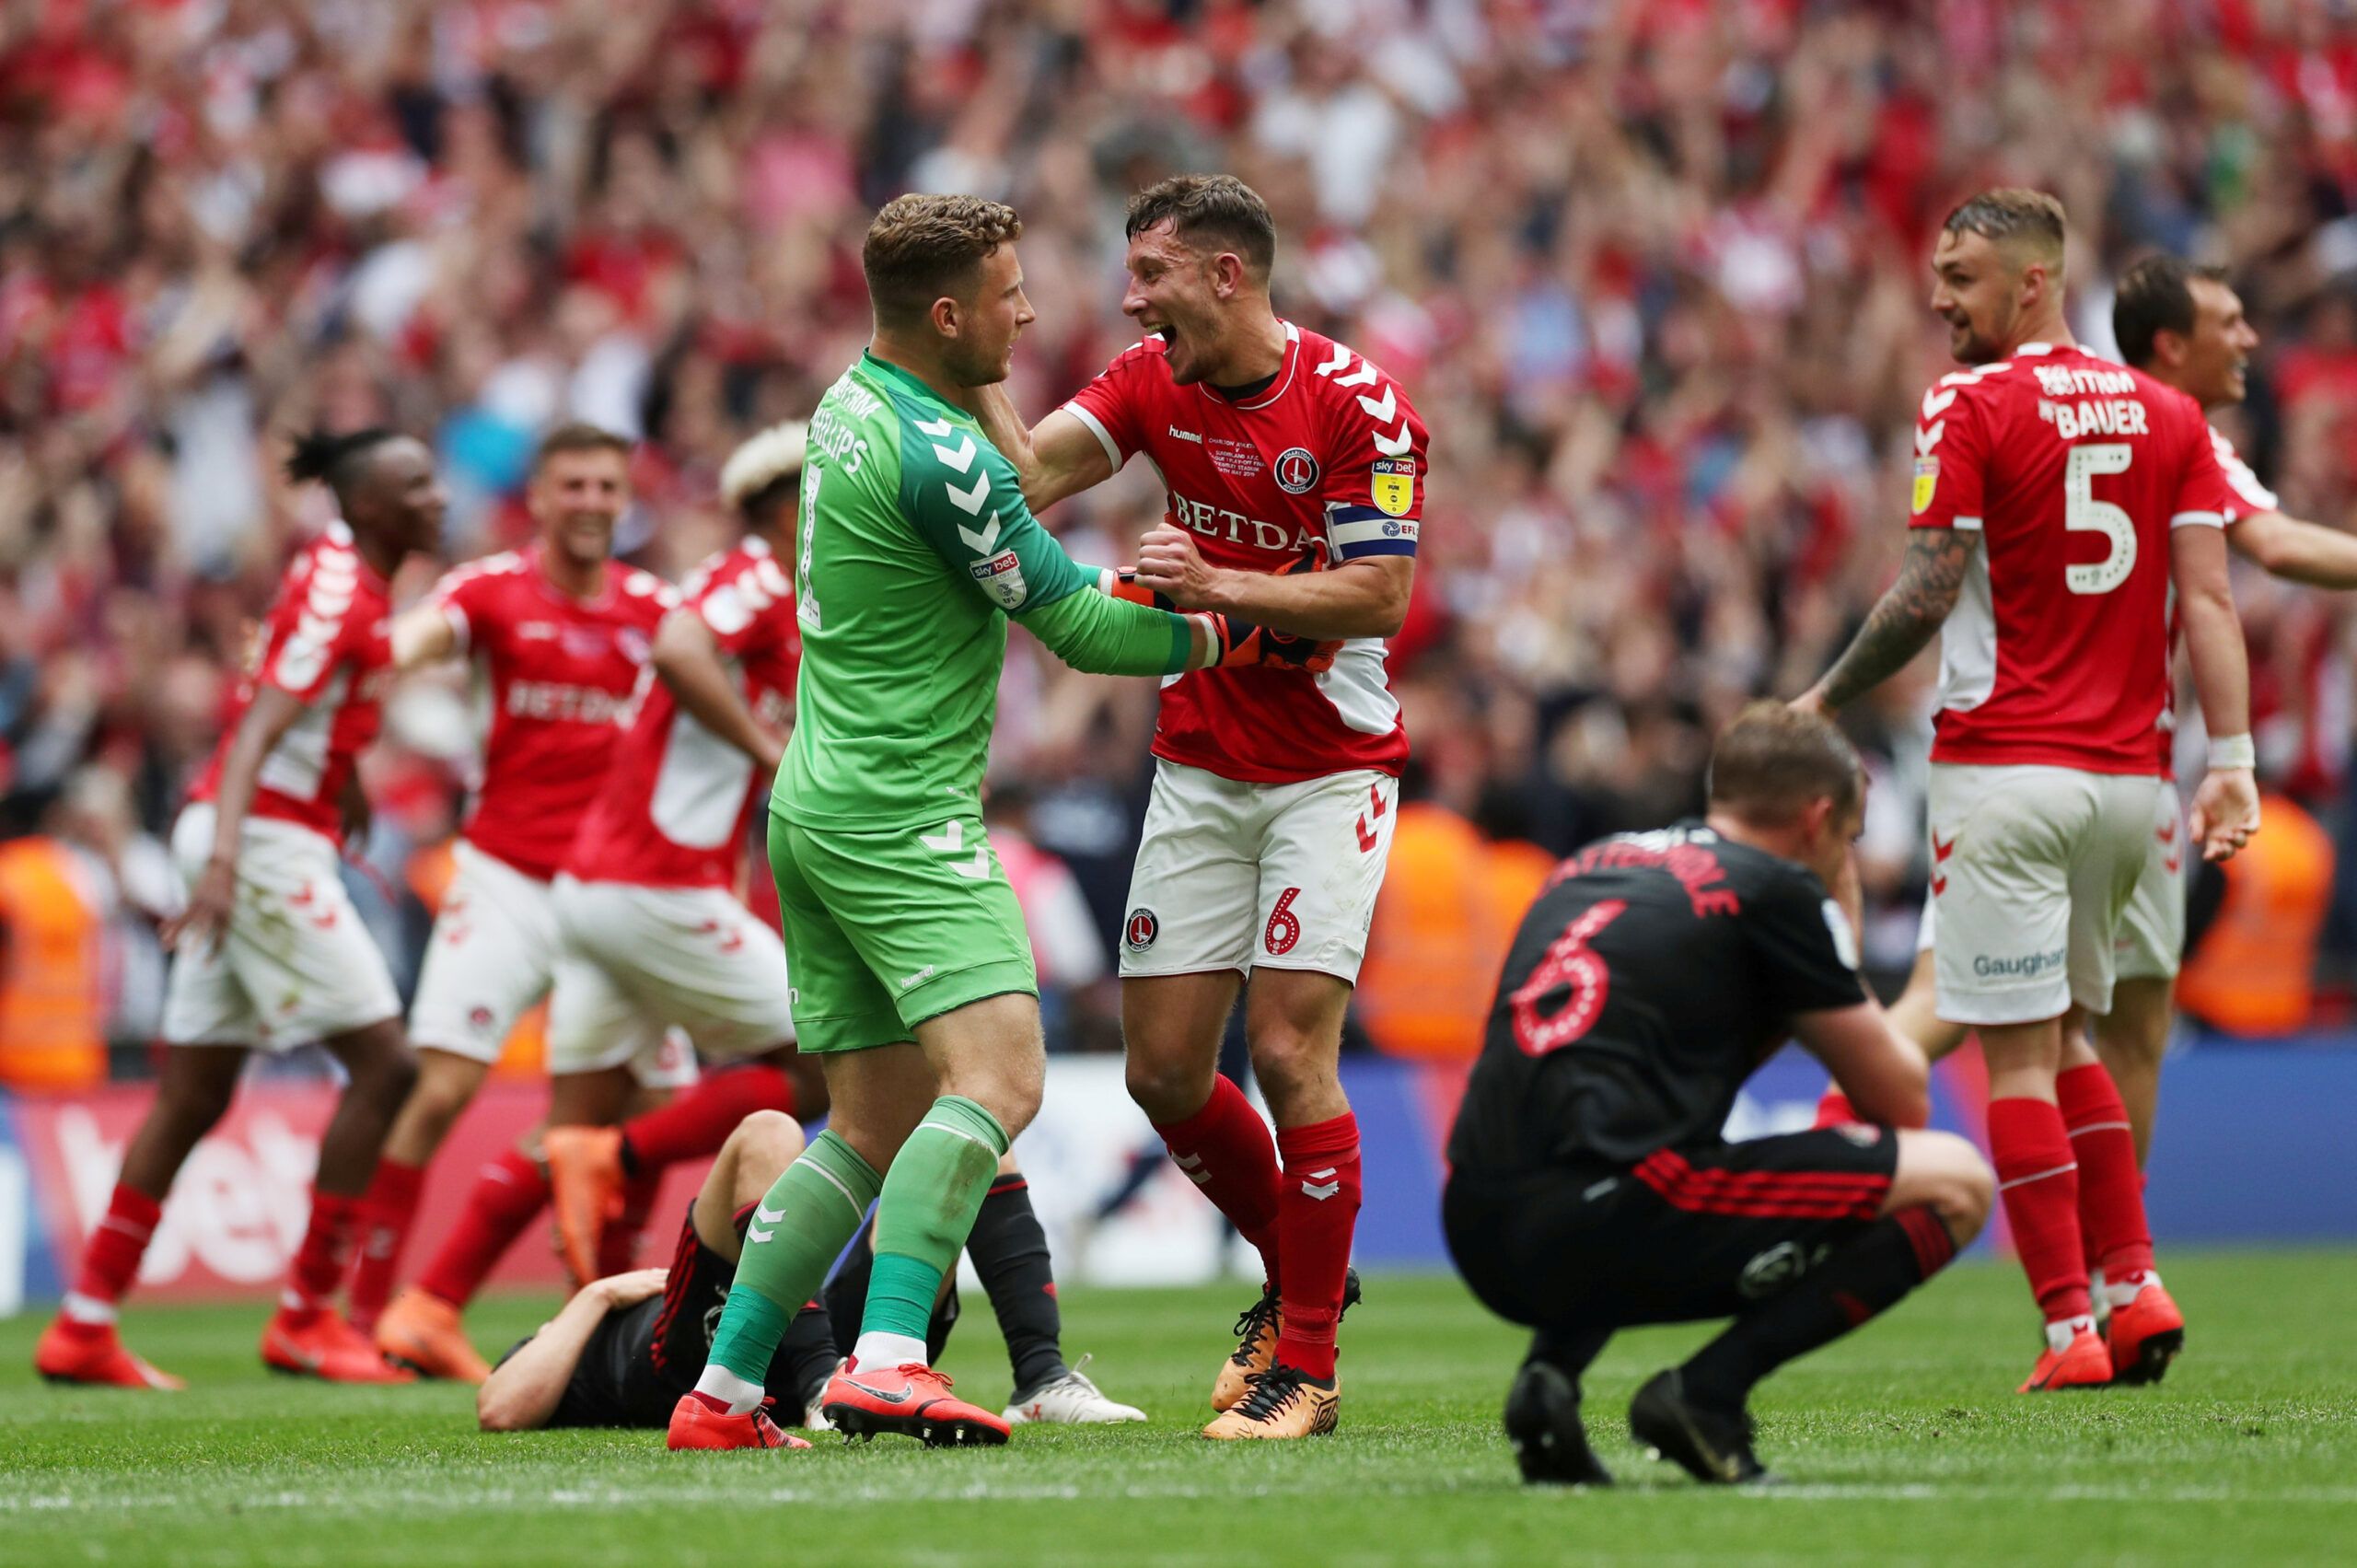 Soccer Football - League One Playoff Final - Sunderland v Charlton Athletic - Wembley Stadium, London, Britain - May 26, 2019  Charlton Athletic's Dillon Phillips and Jason Pearce celebrate after the match as Sunderland's Lee Cattermole looks dejected   Action Images/Lee Smith  EDITORIAL USE ONLY. No use with unauthorized audio, video, data, fixture lists, club/league logos or 